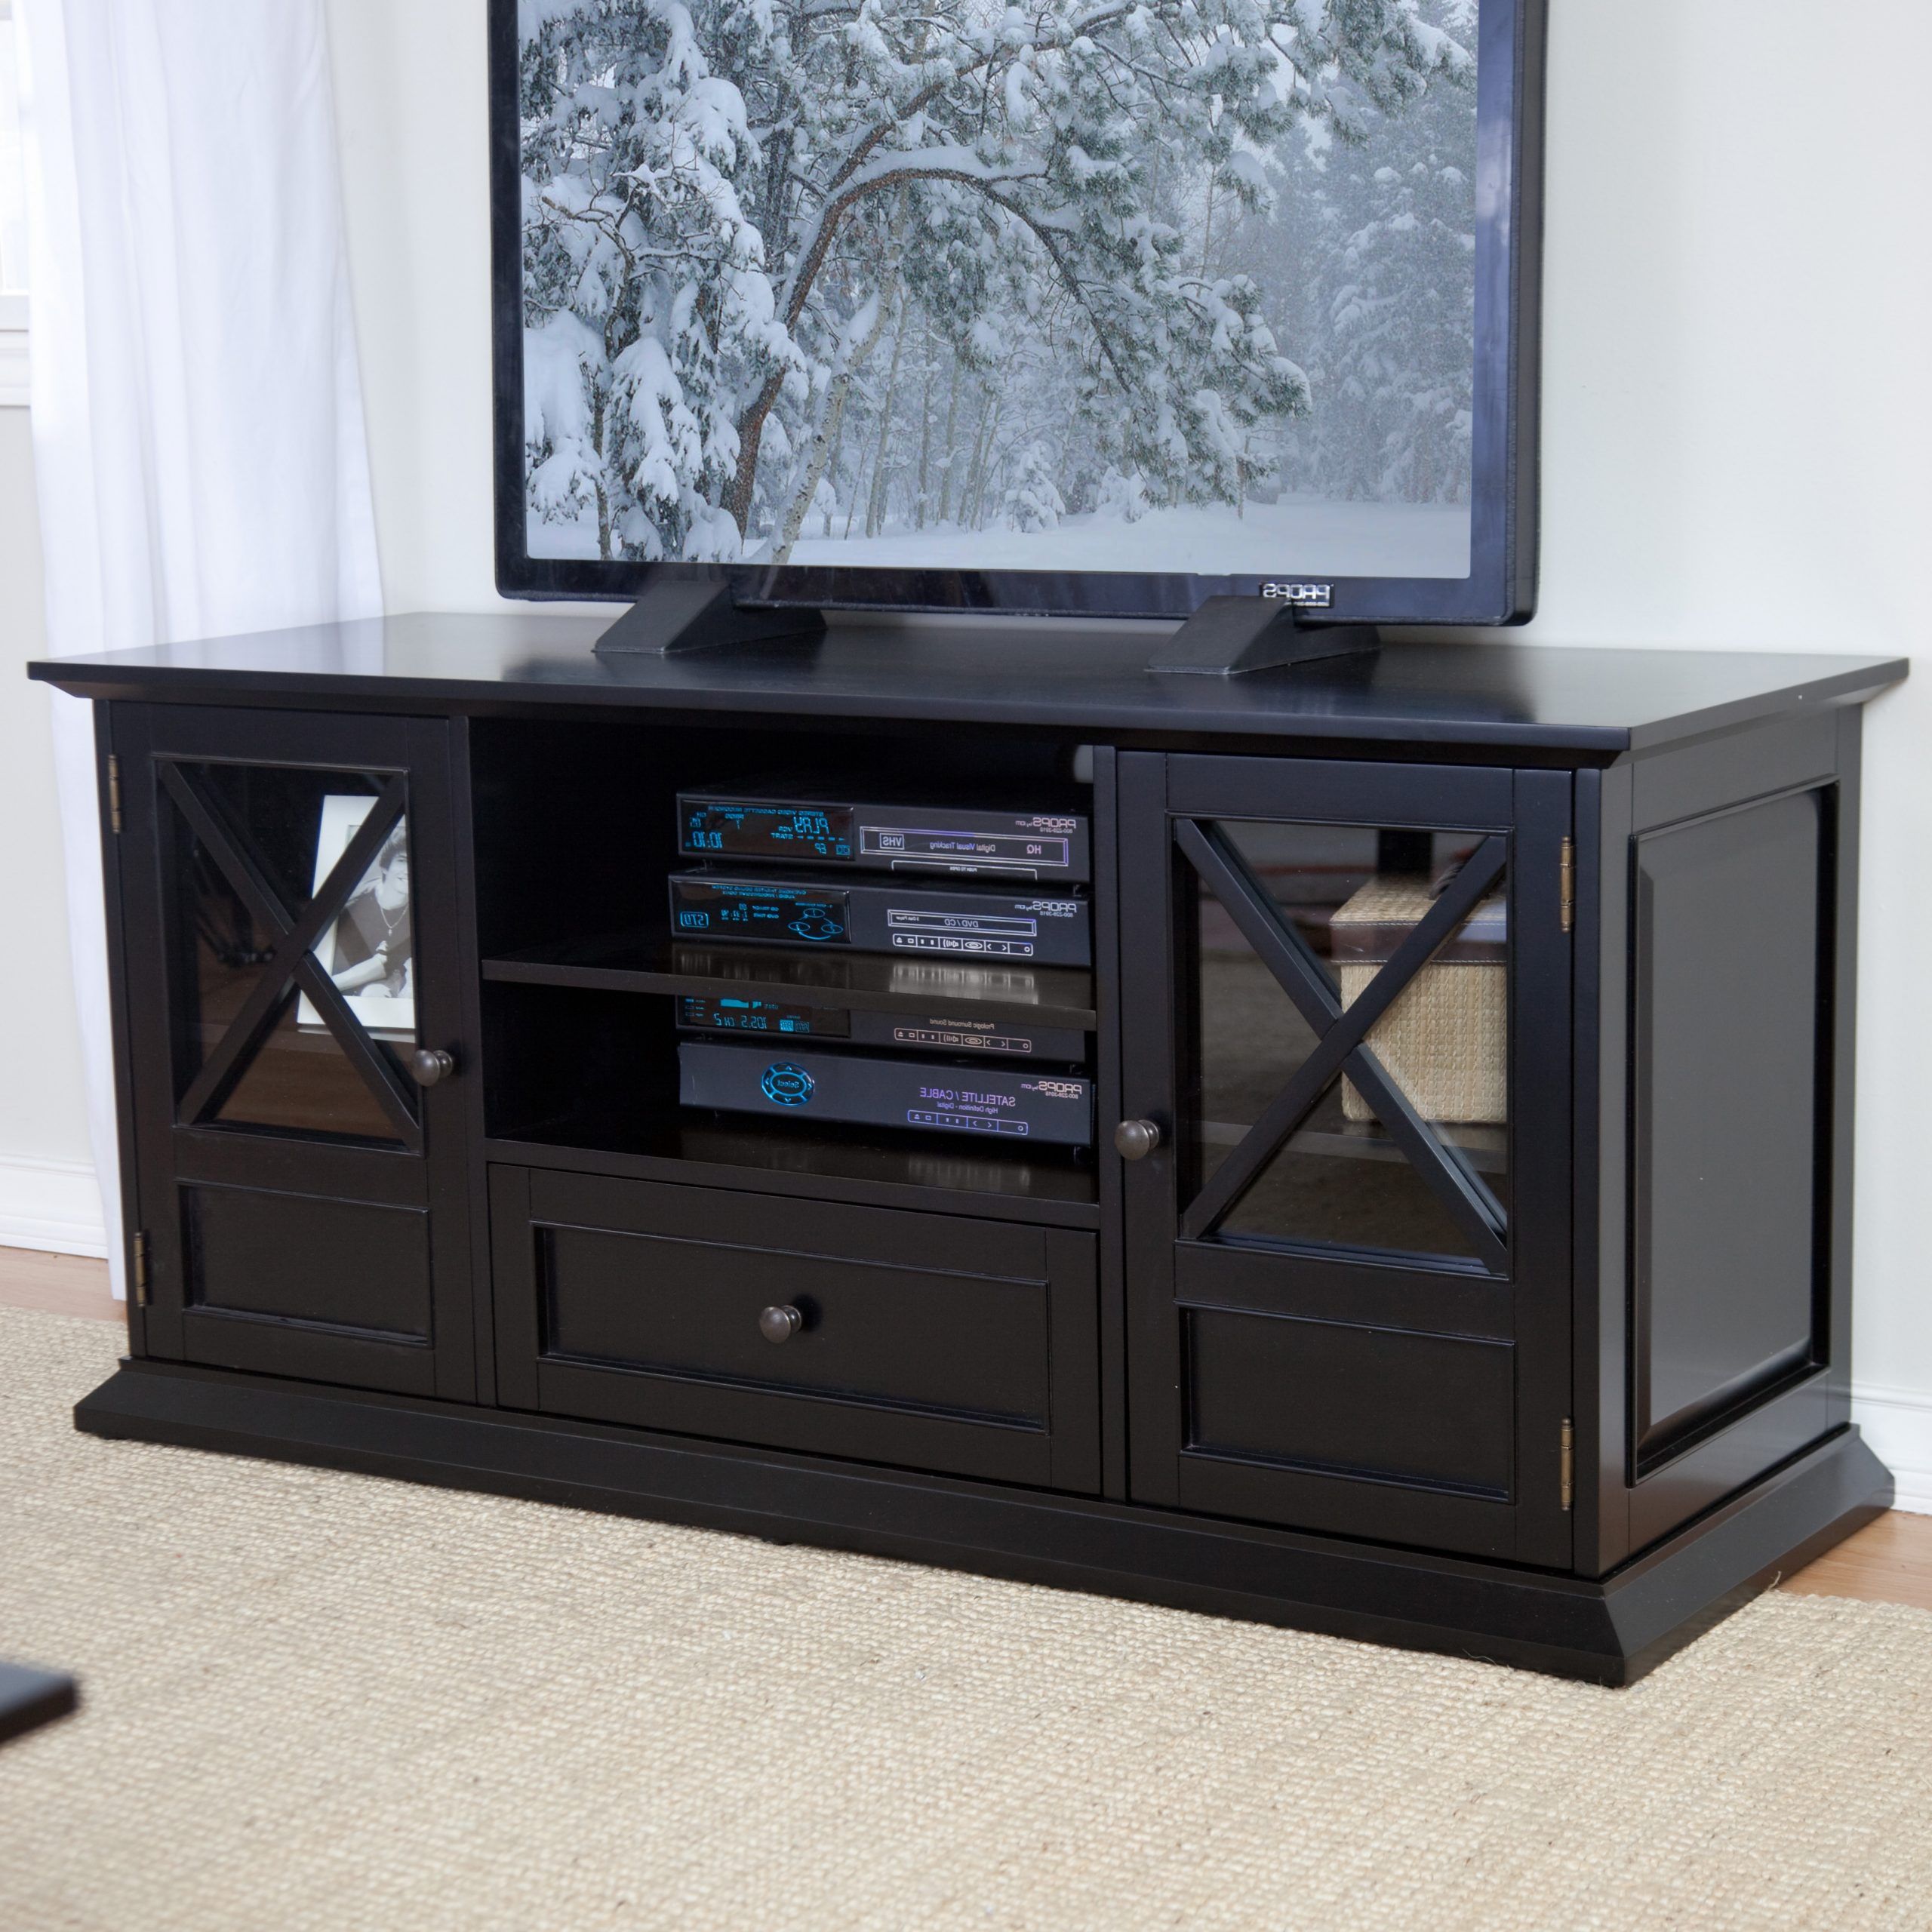 Belham Living Hampton 55 Inch Tv Stand – Black At Hayneedle Intended For Greenwich Wide Tv Stands (View 4 of 20)